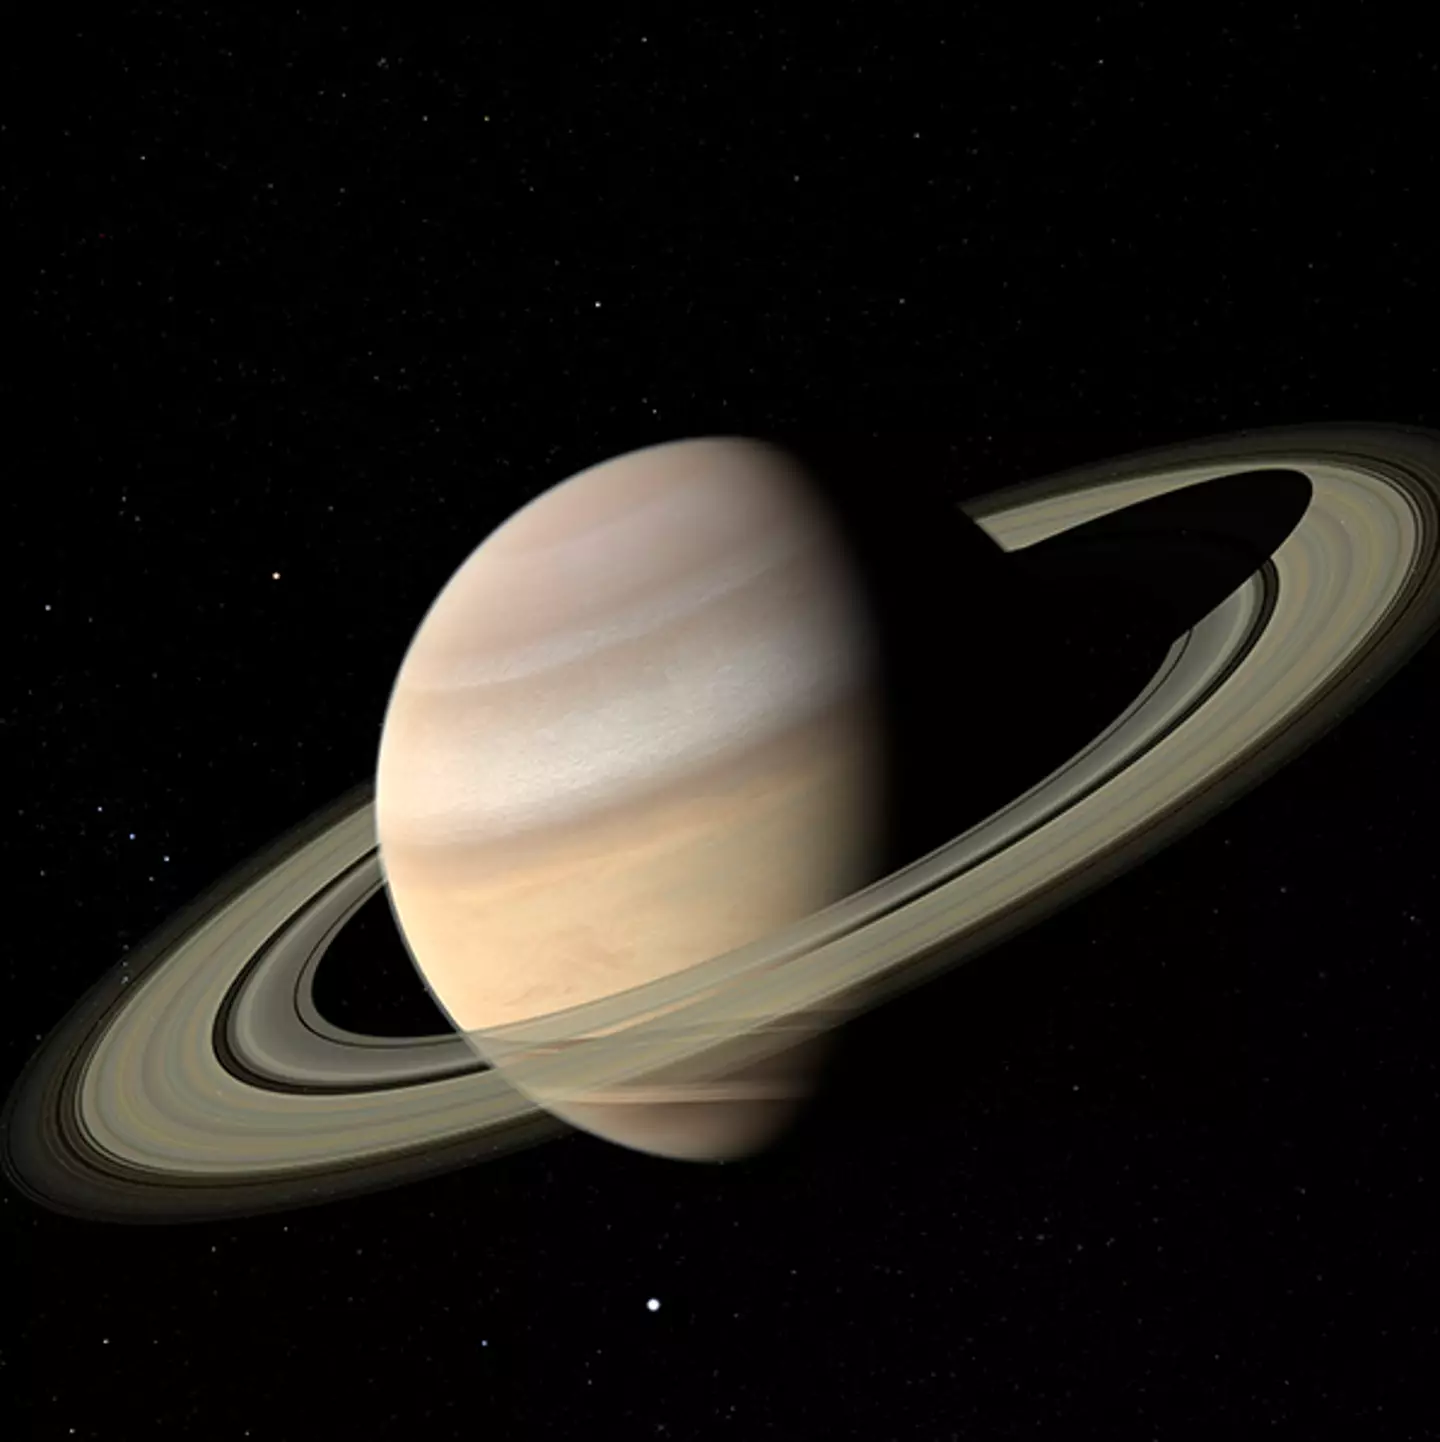 Saturn’s rings set to disappear within the next 18 months